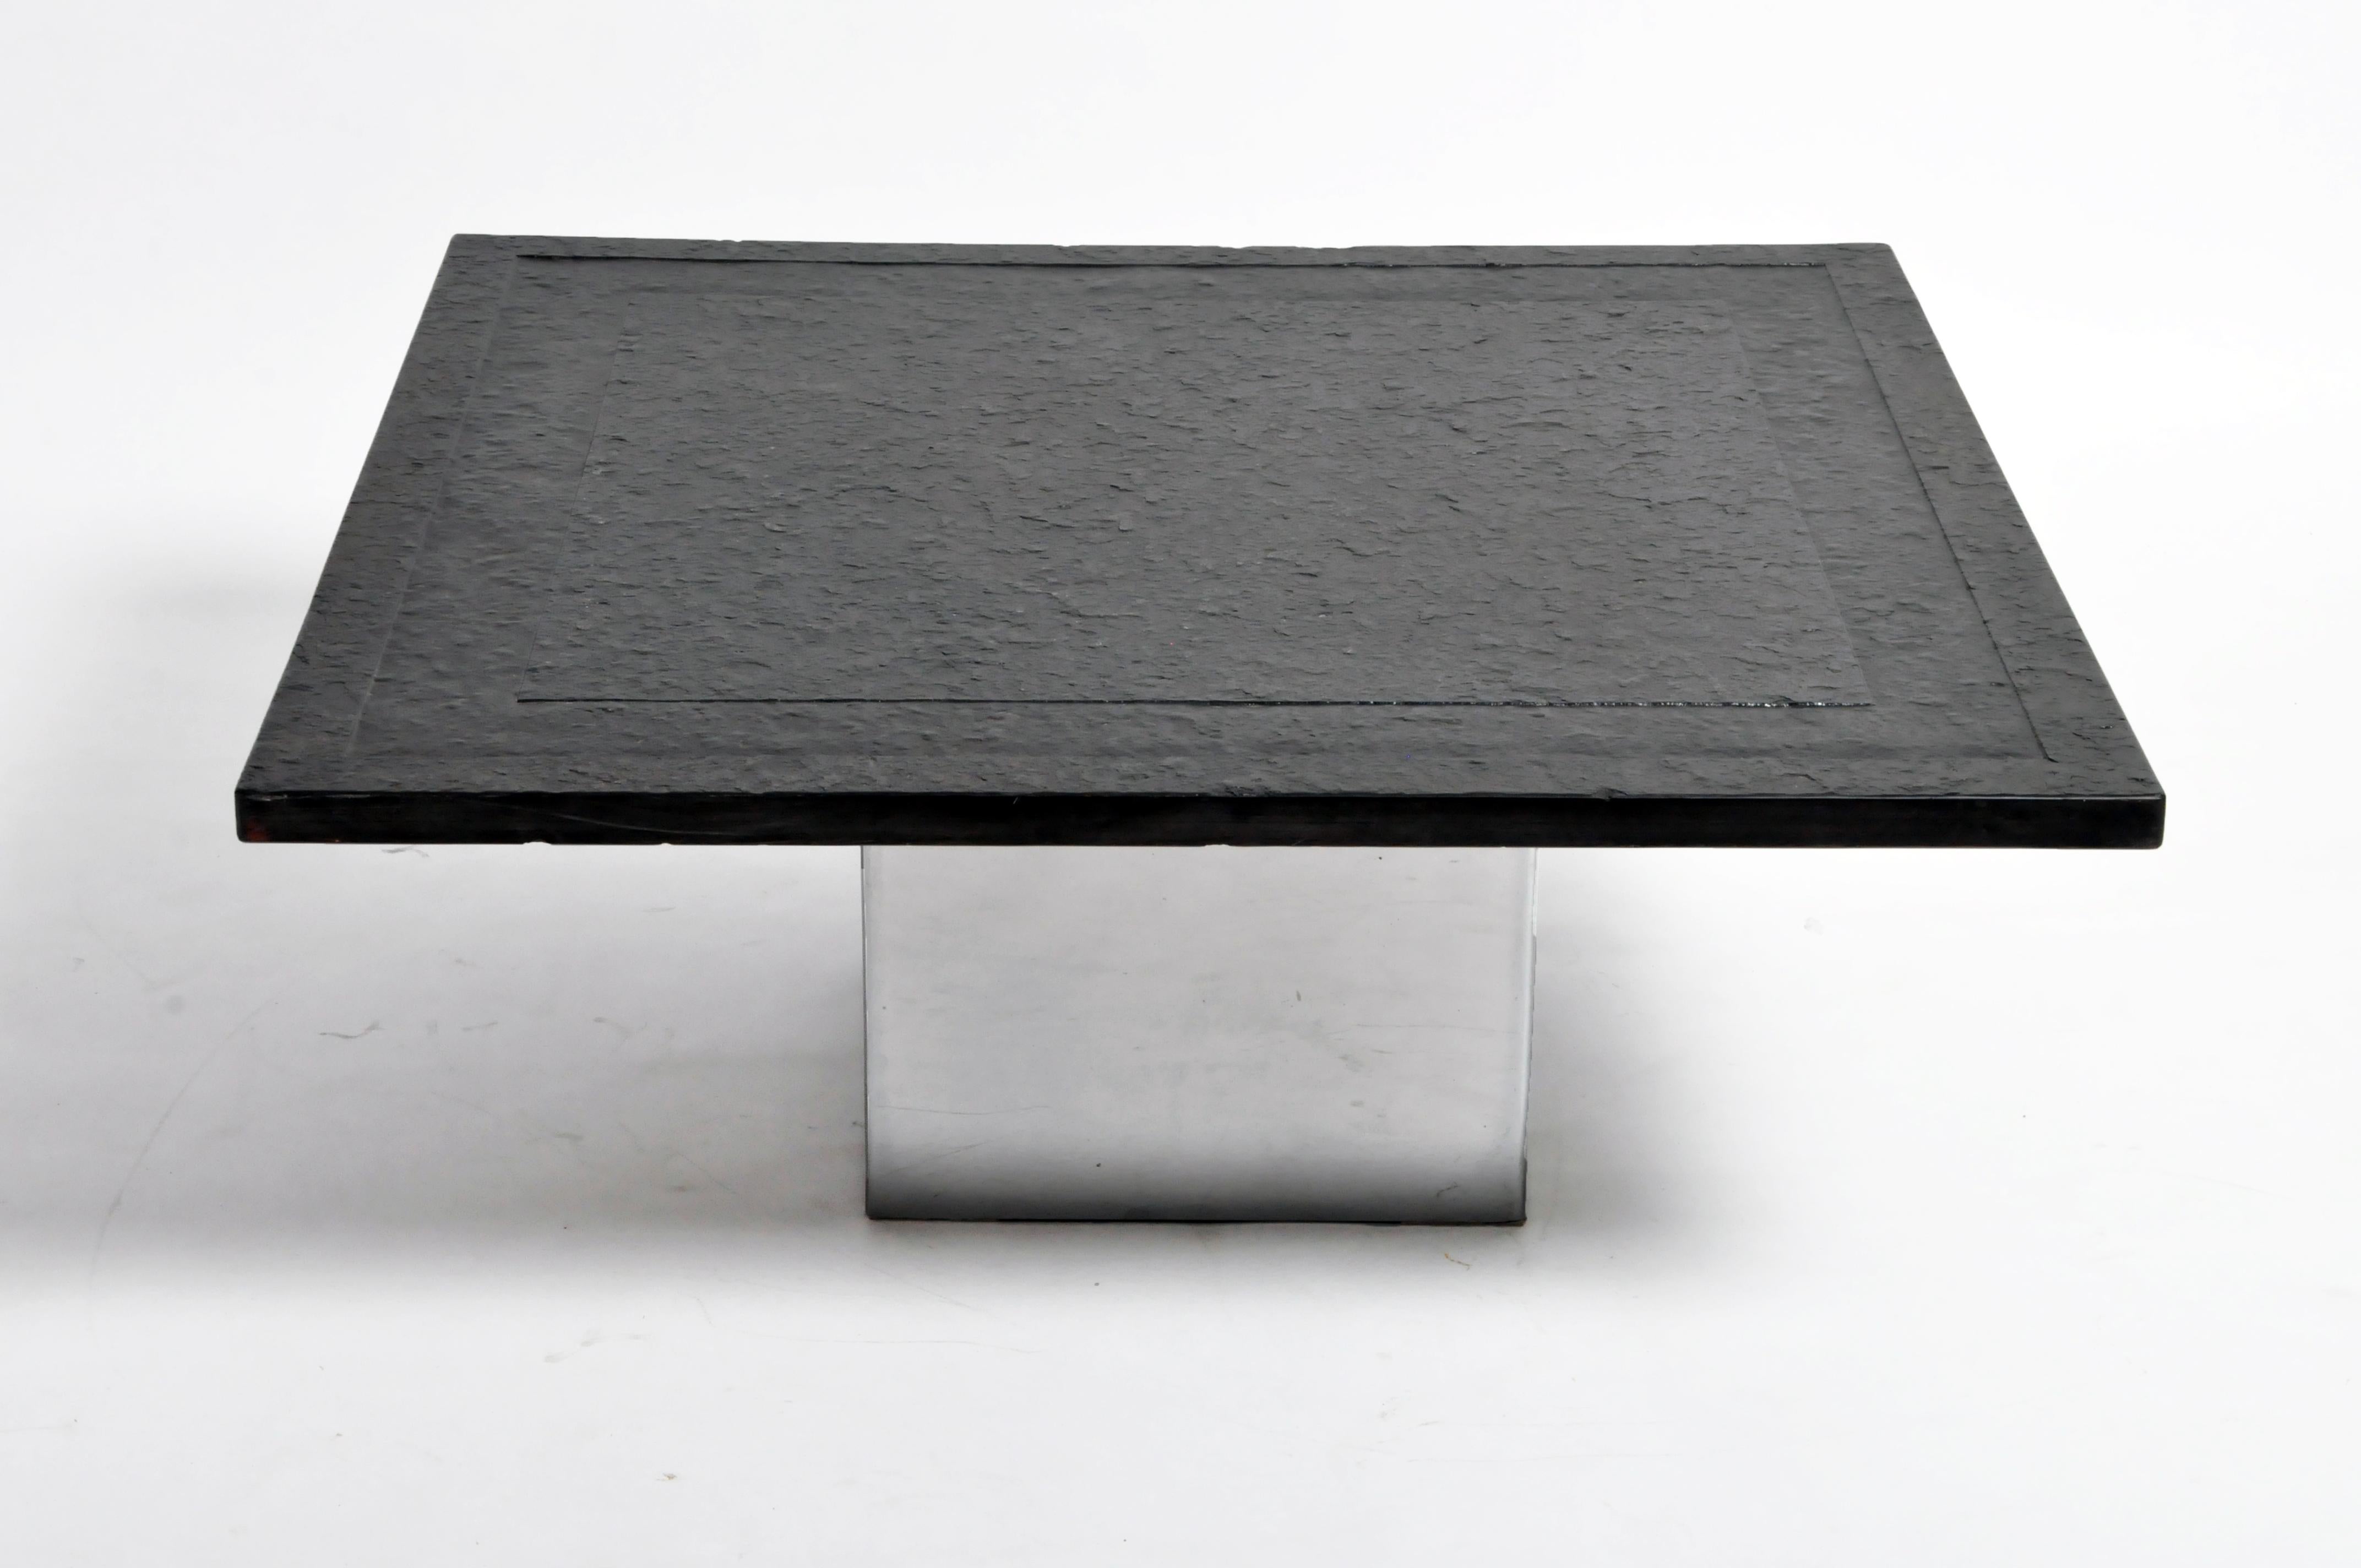 Late 20th Century French Black Granite Coffee Table with Metal Base